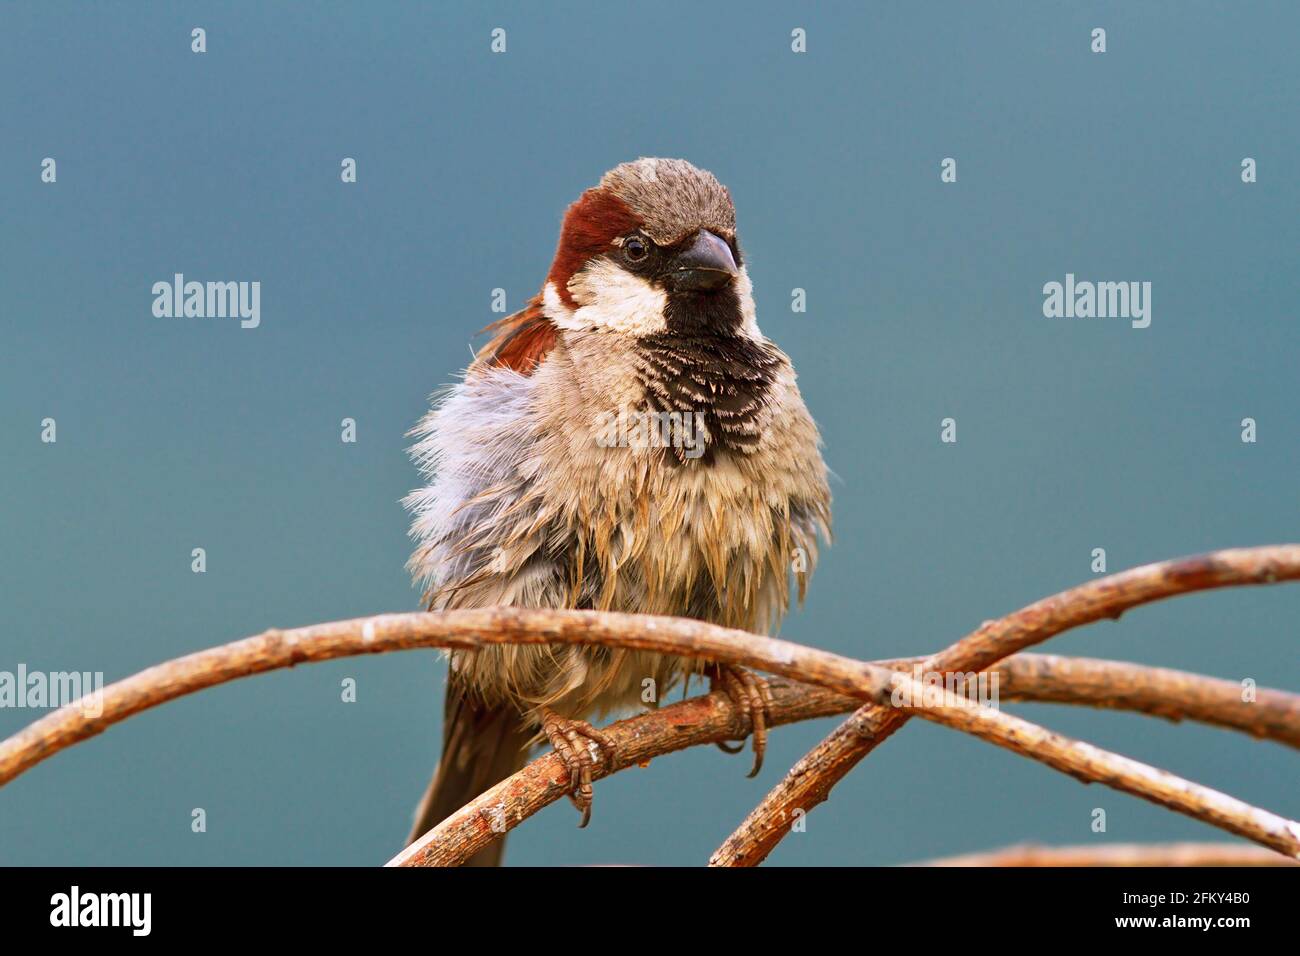 male house sparrow close up (Passer domesticus); bird perched on a branch Stock Photo